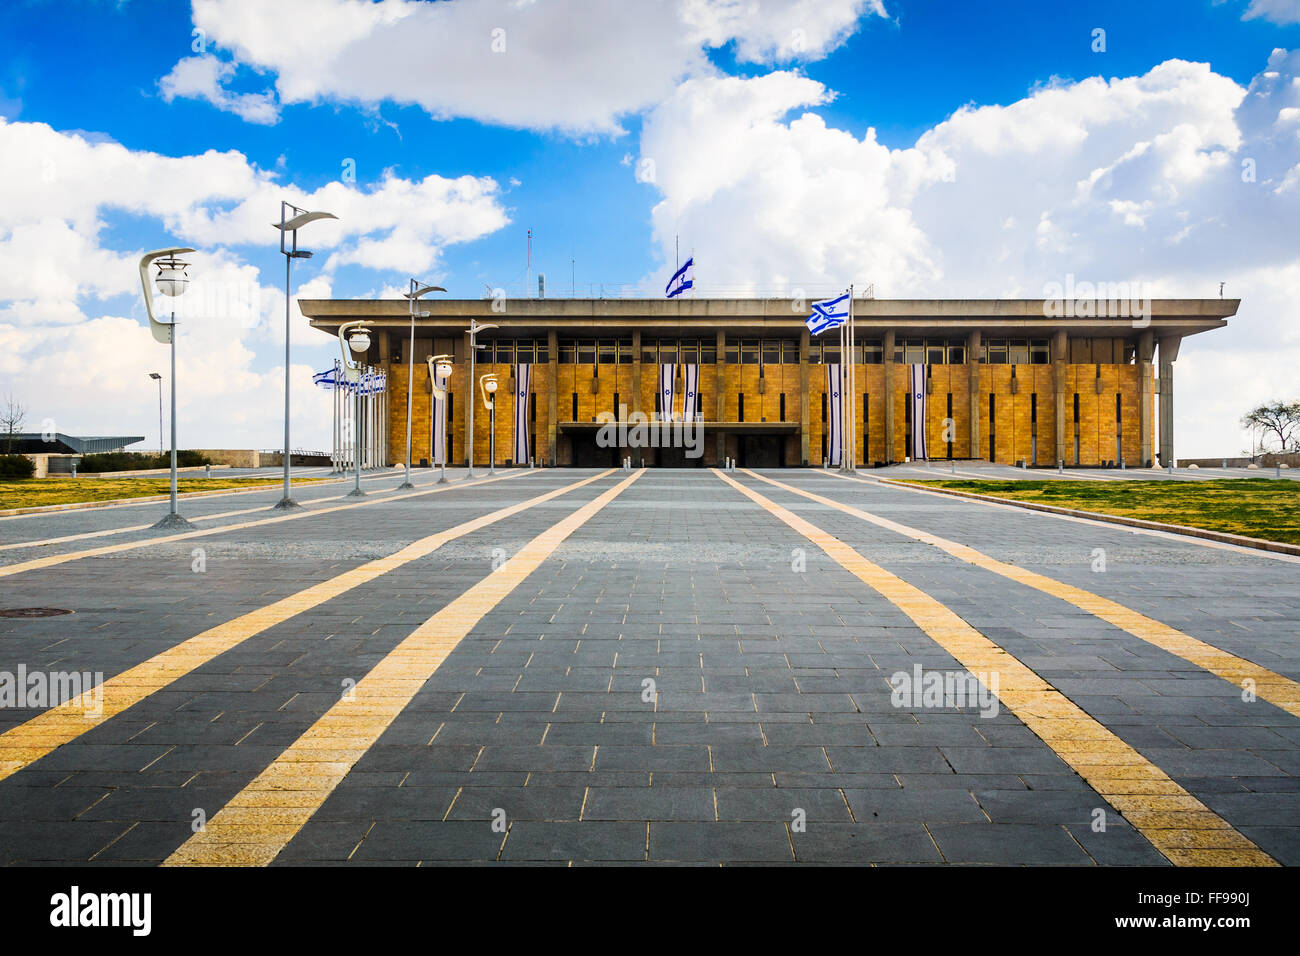 The Knesset Building. The Knesset is the legislative branch of the Israeli government. Stock Photo